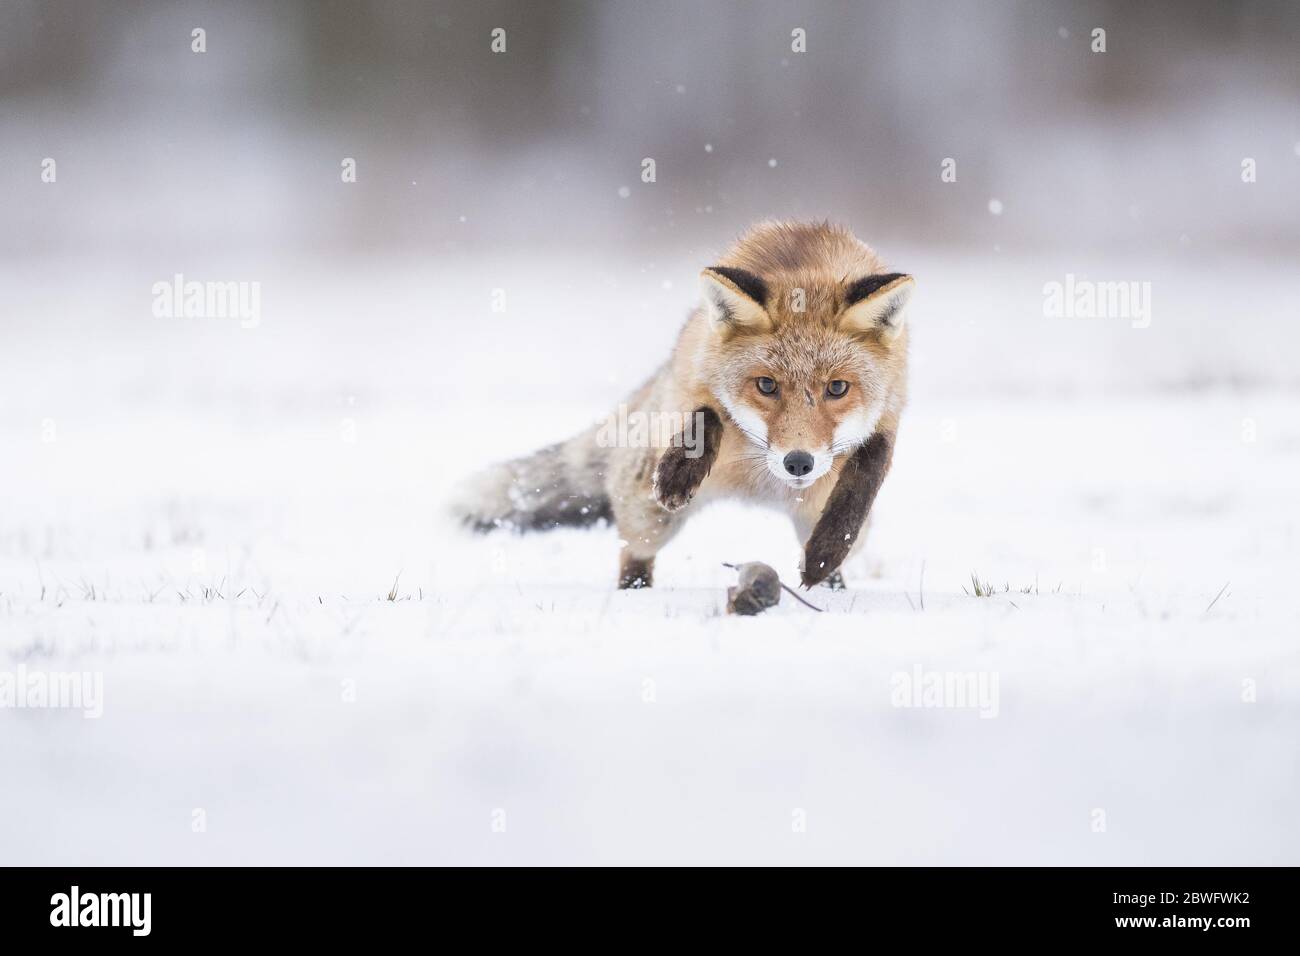 A fox bears down on its squeaky prey. CZECH REPUBLIC: THIS FOX looks delighted with itself as it leaps towards a startled mouse in an astonishing phot Stock Photo